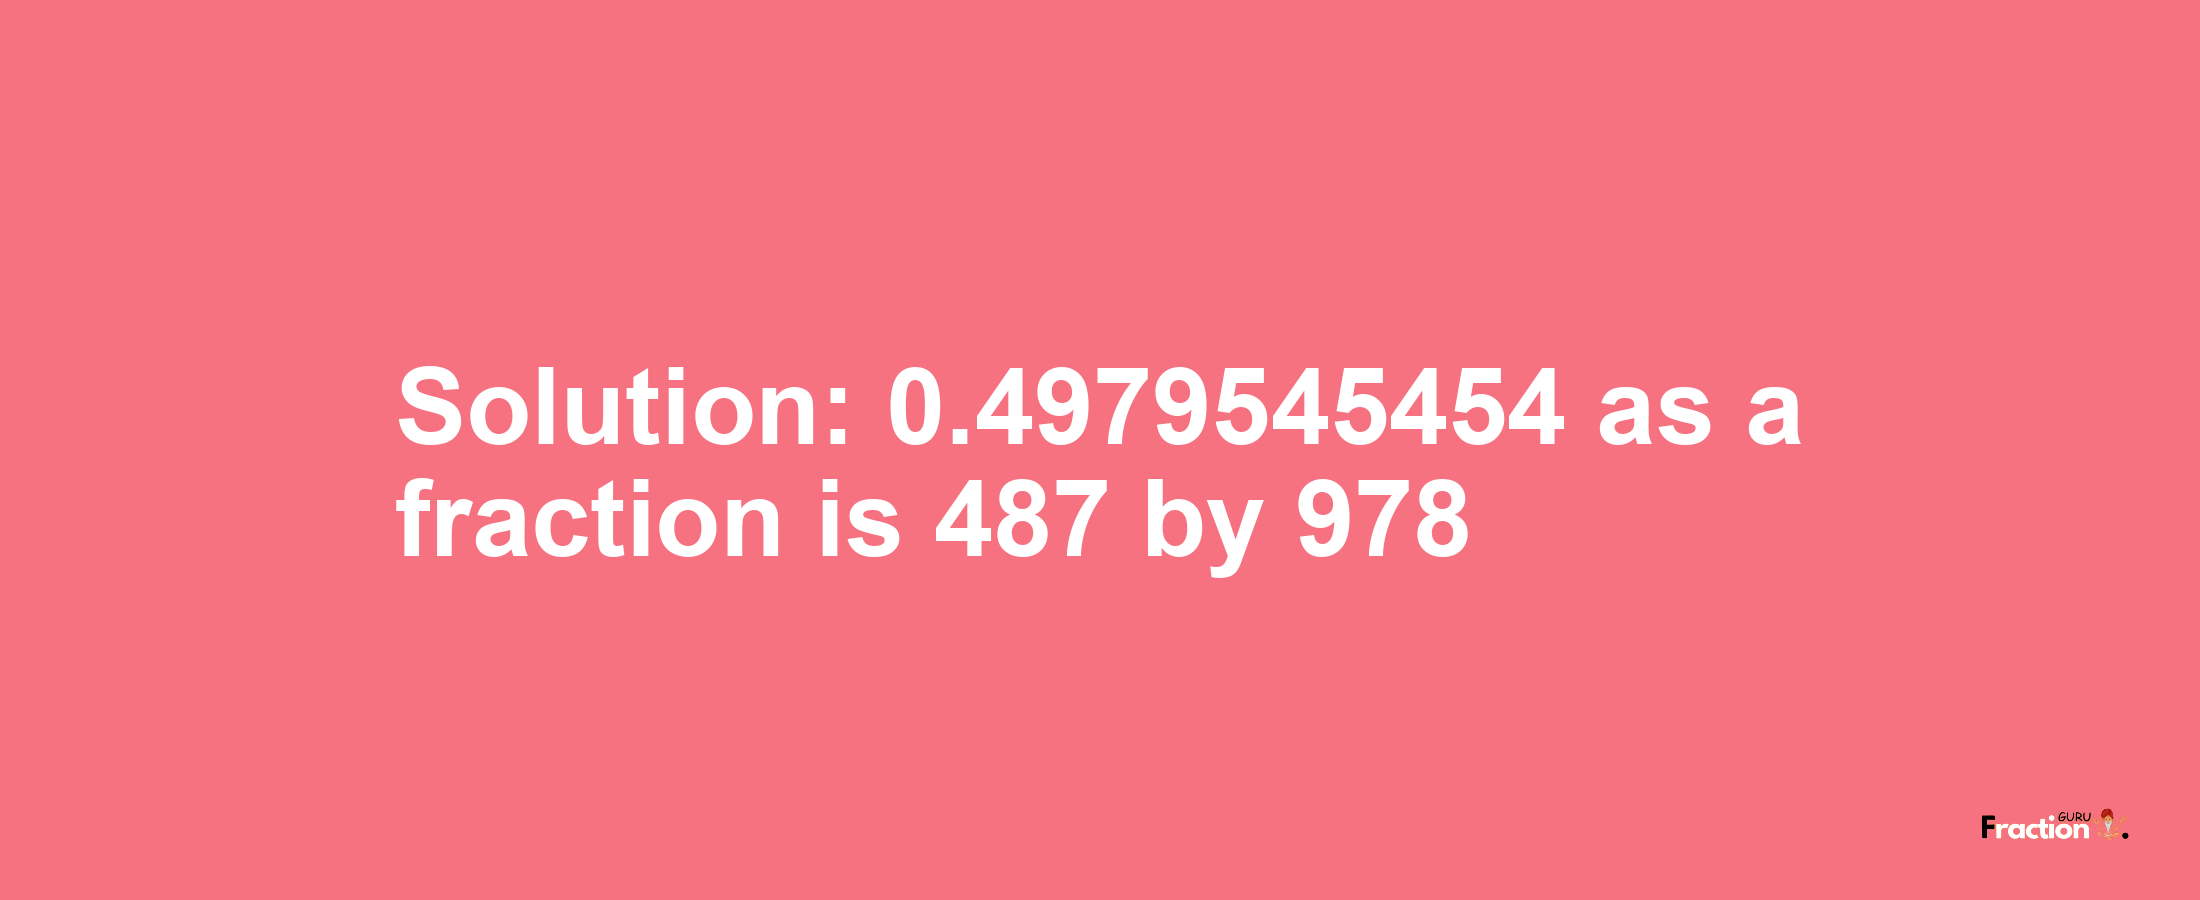 Solution:0.4979545454 as a fraction is 487/978